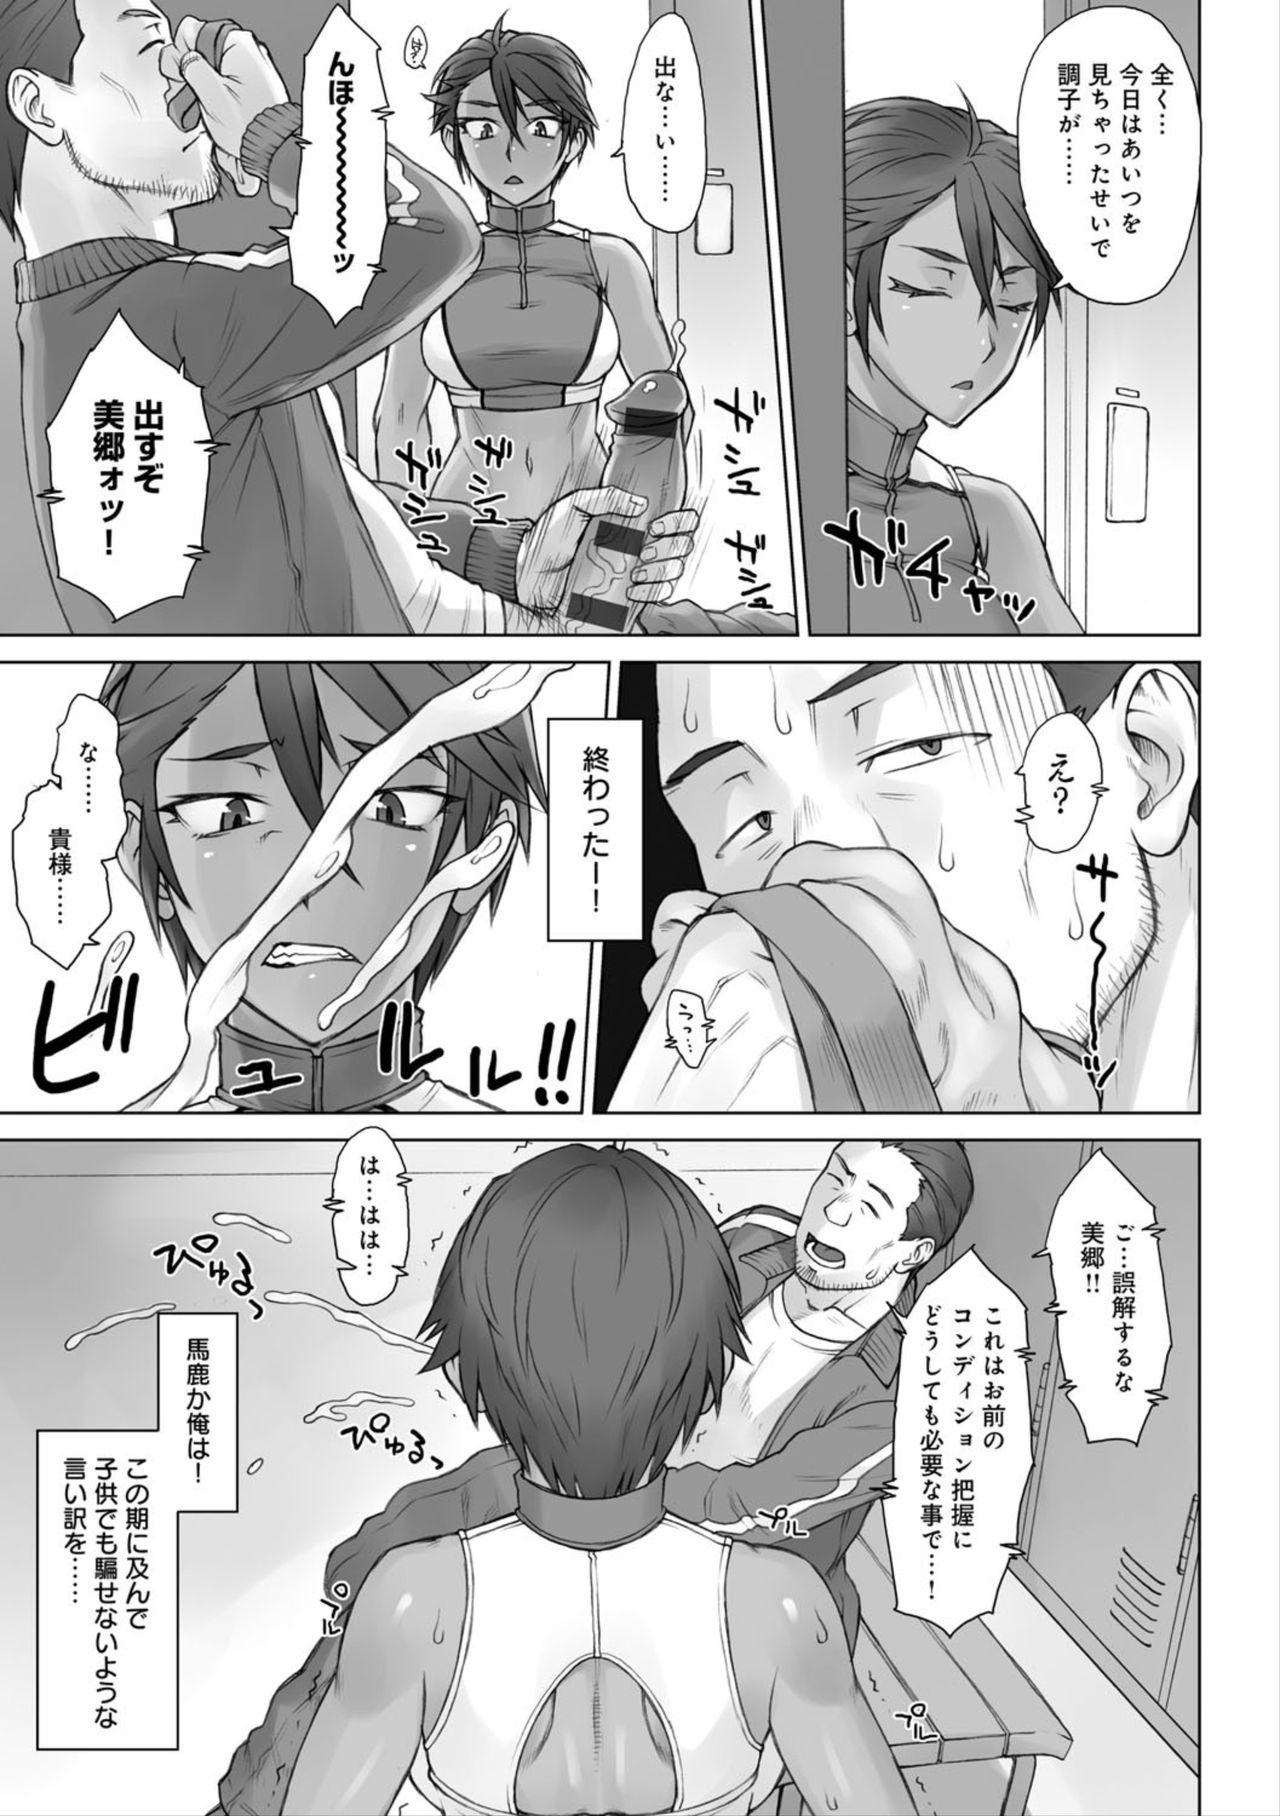 Kissing Shidoukan Day after Amateurs Gone Wild - Page 9